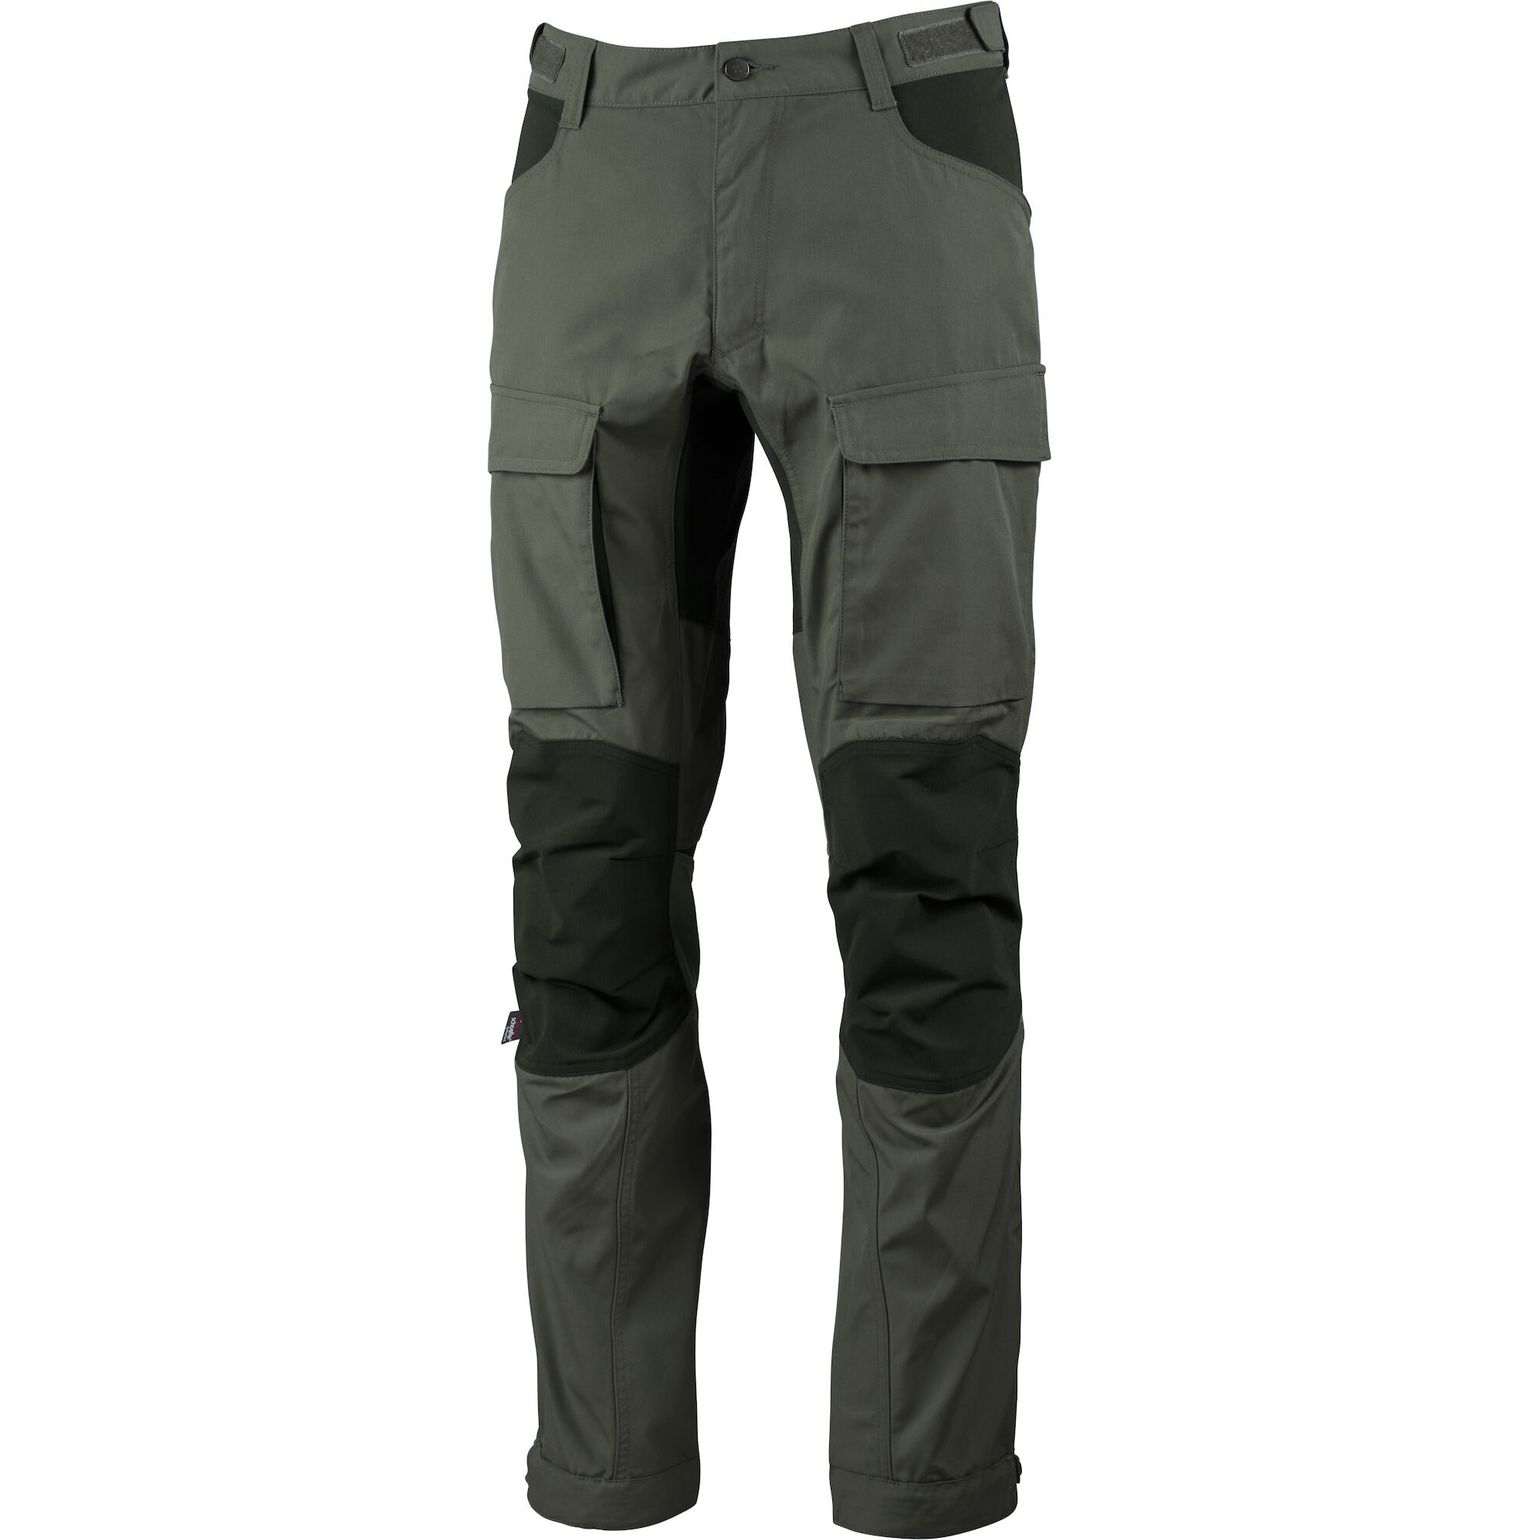 Lundhags Men's Authentic II Pant Forest Green/Dark Fg